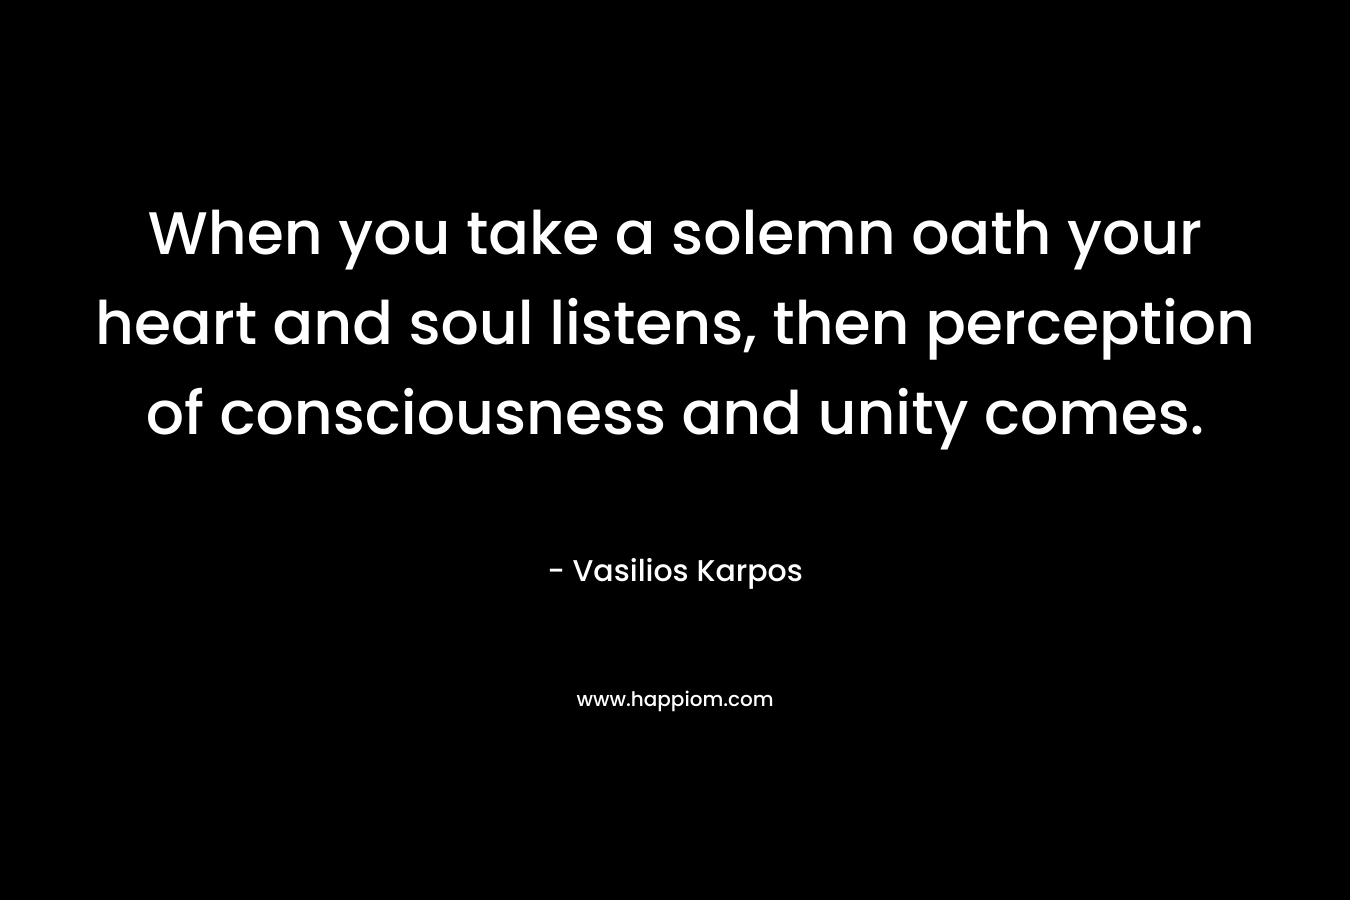 When you take a solemn oath your heart and soul listens, then perception of consciousness and unity comes.